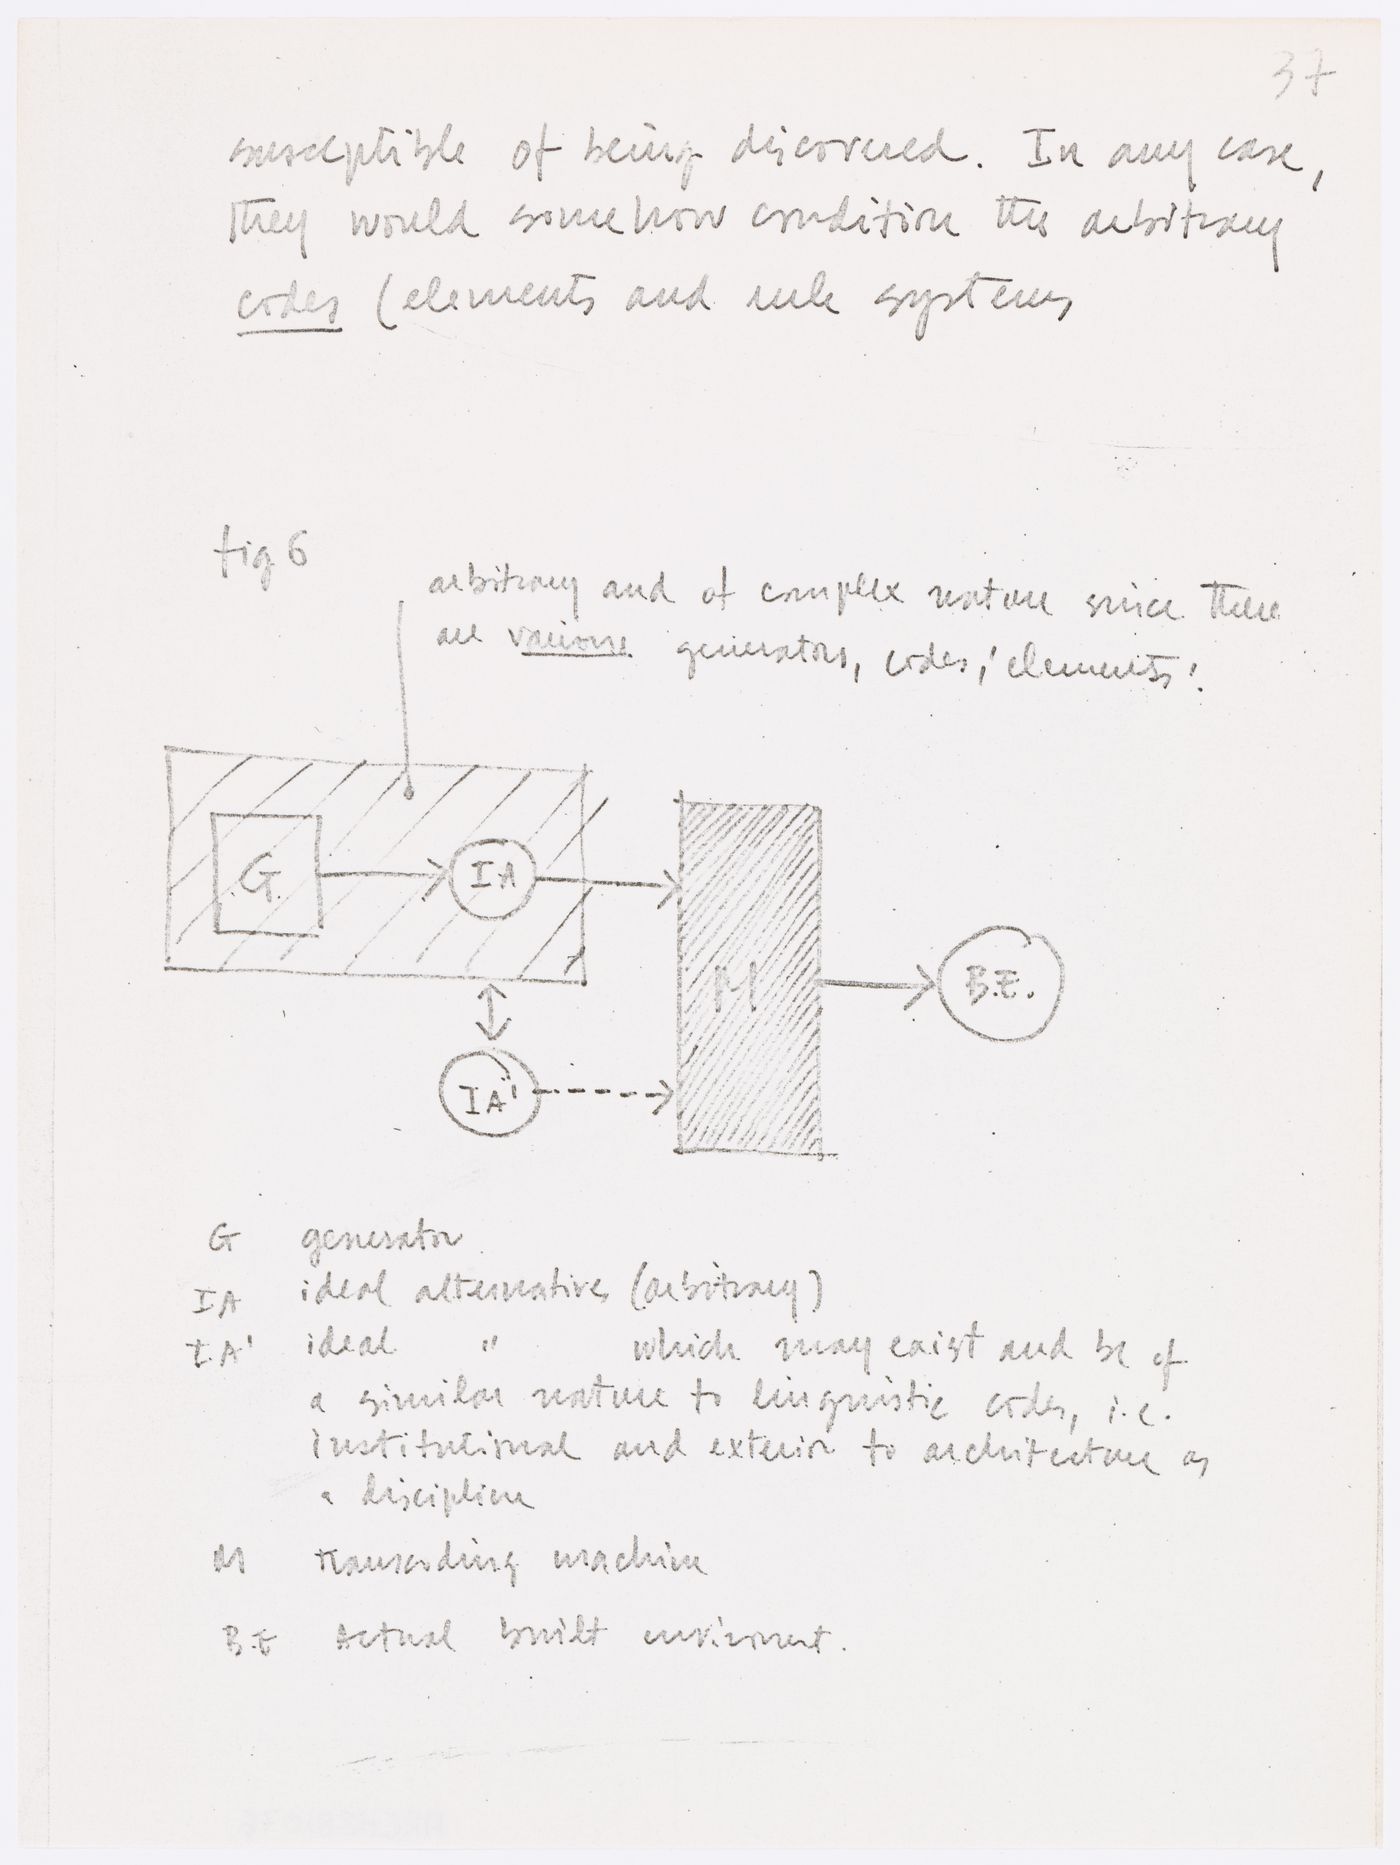 Page from Grant application to the Department of Health, Education, and Welfare for Program in Generative Design